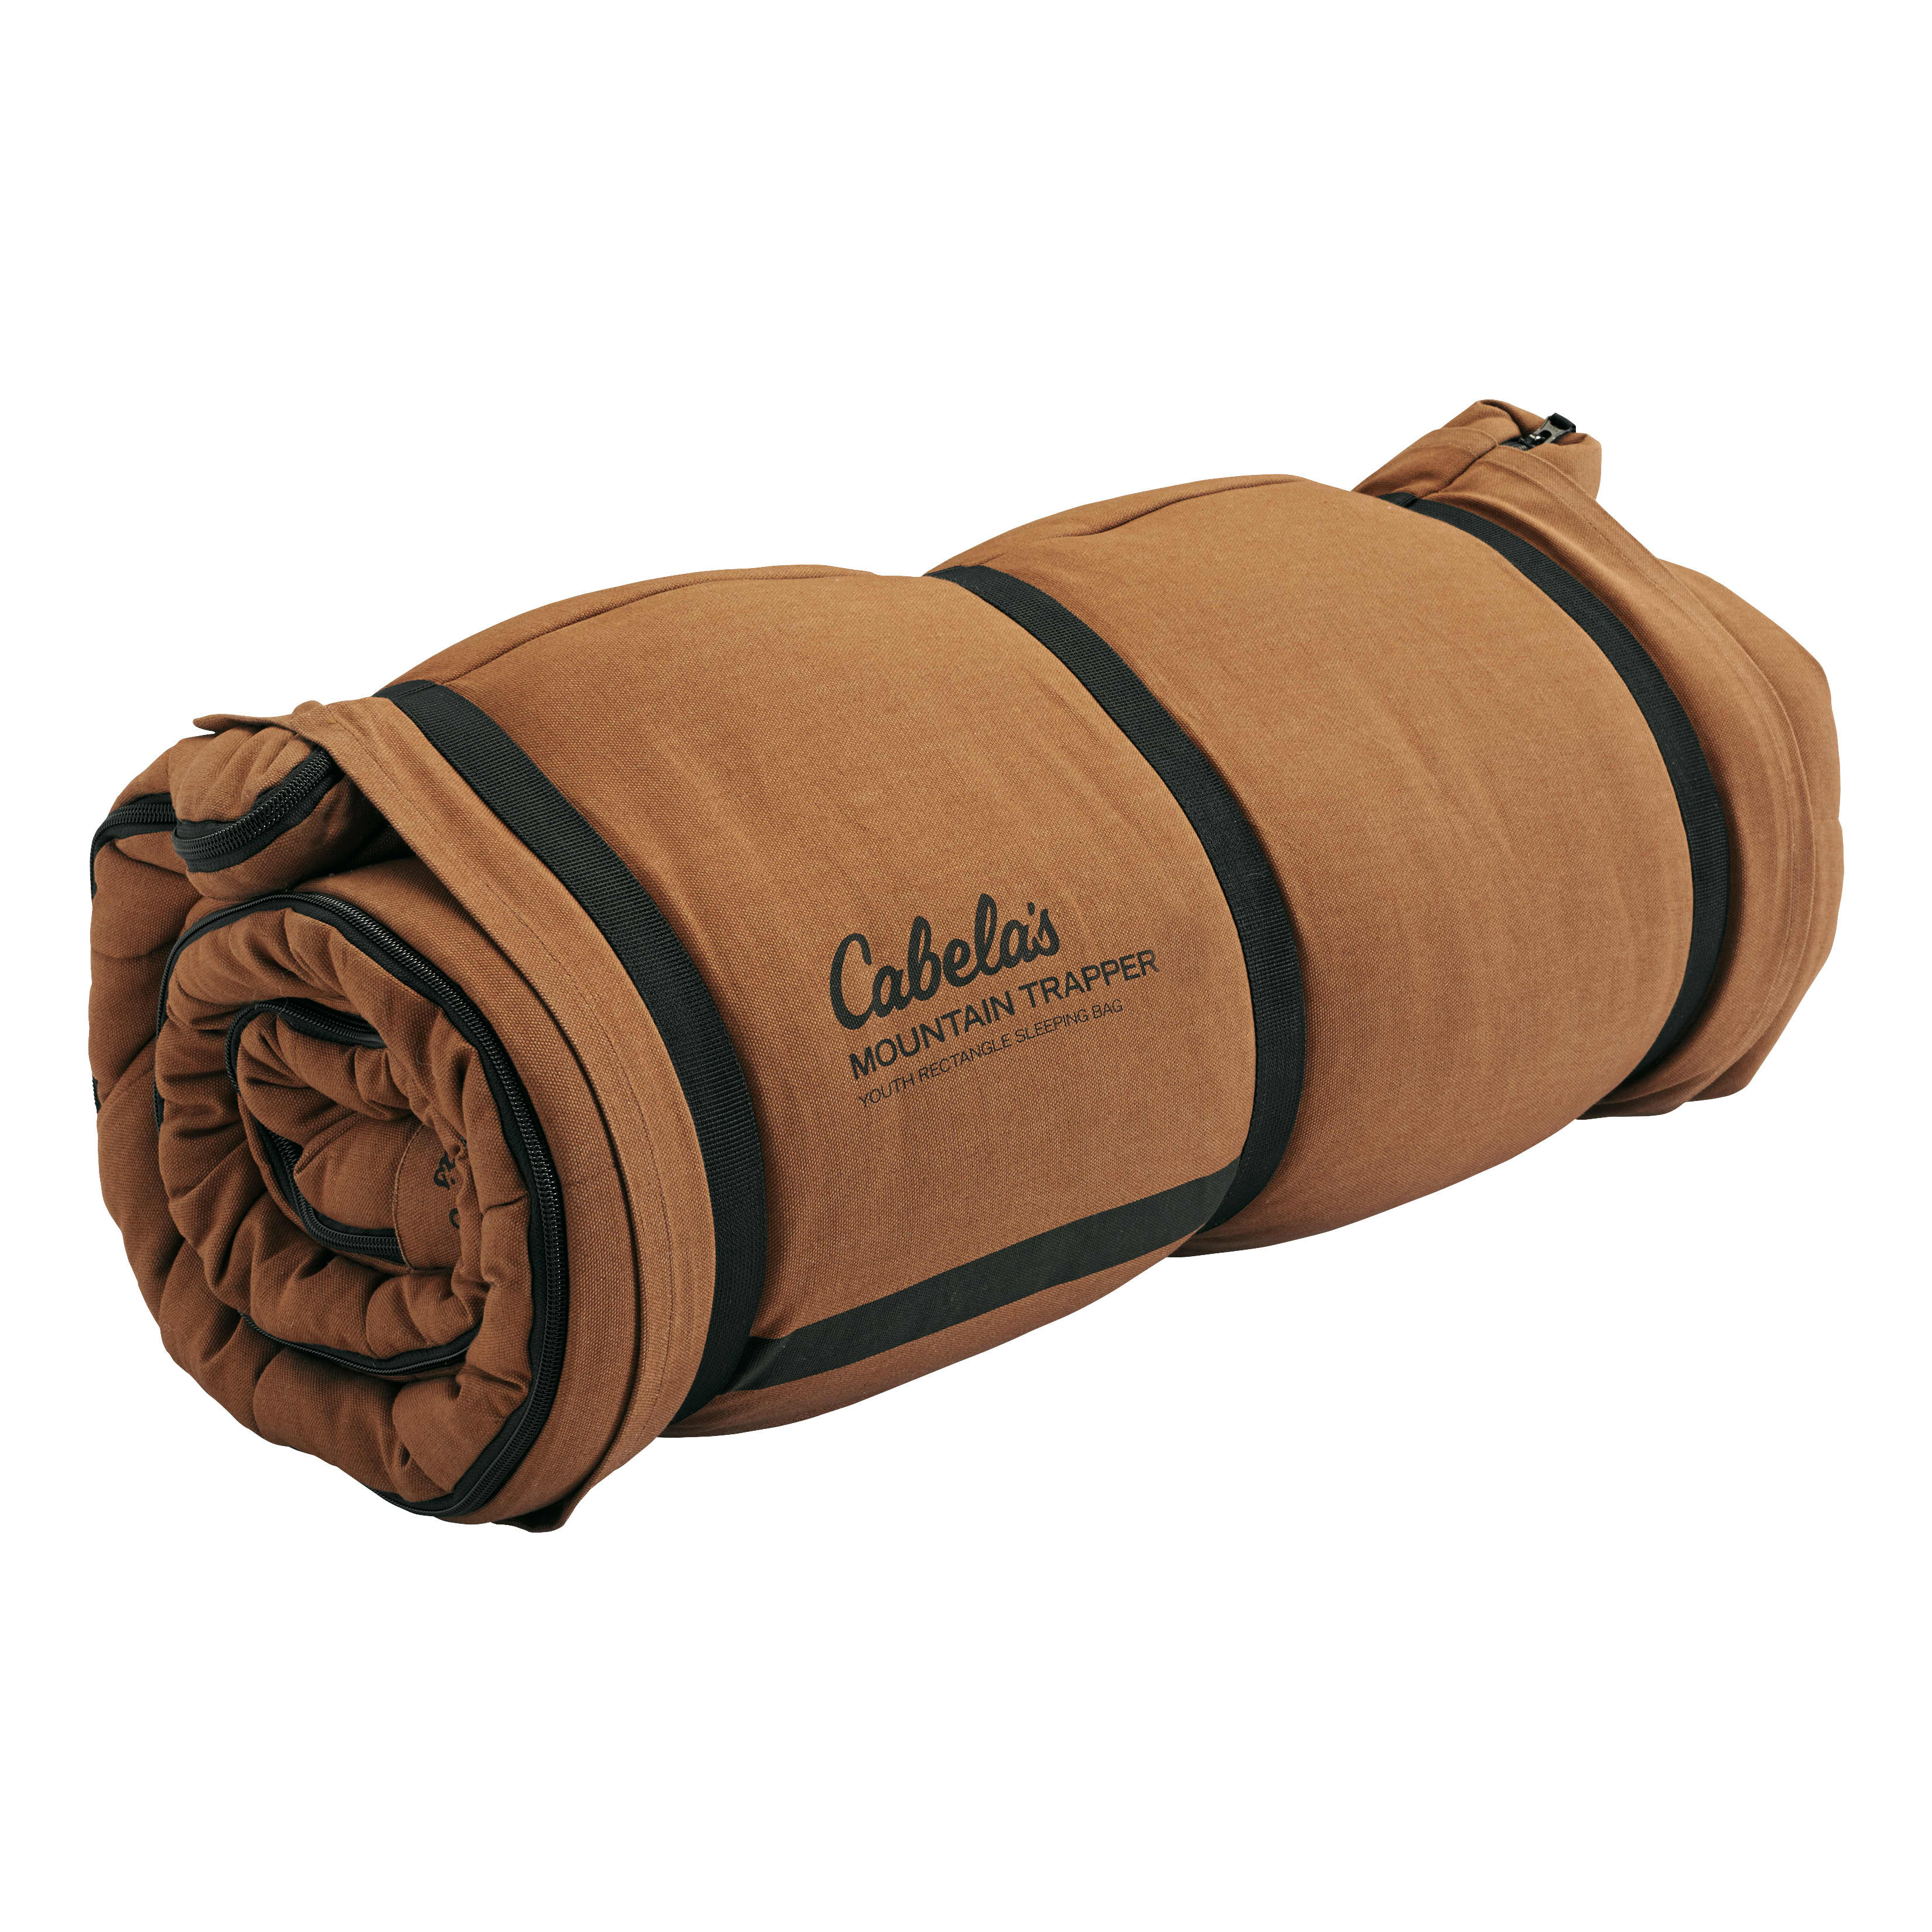 Cabela’s Mountain Trapper Sleeping Bags - Rolled View